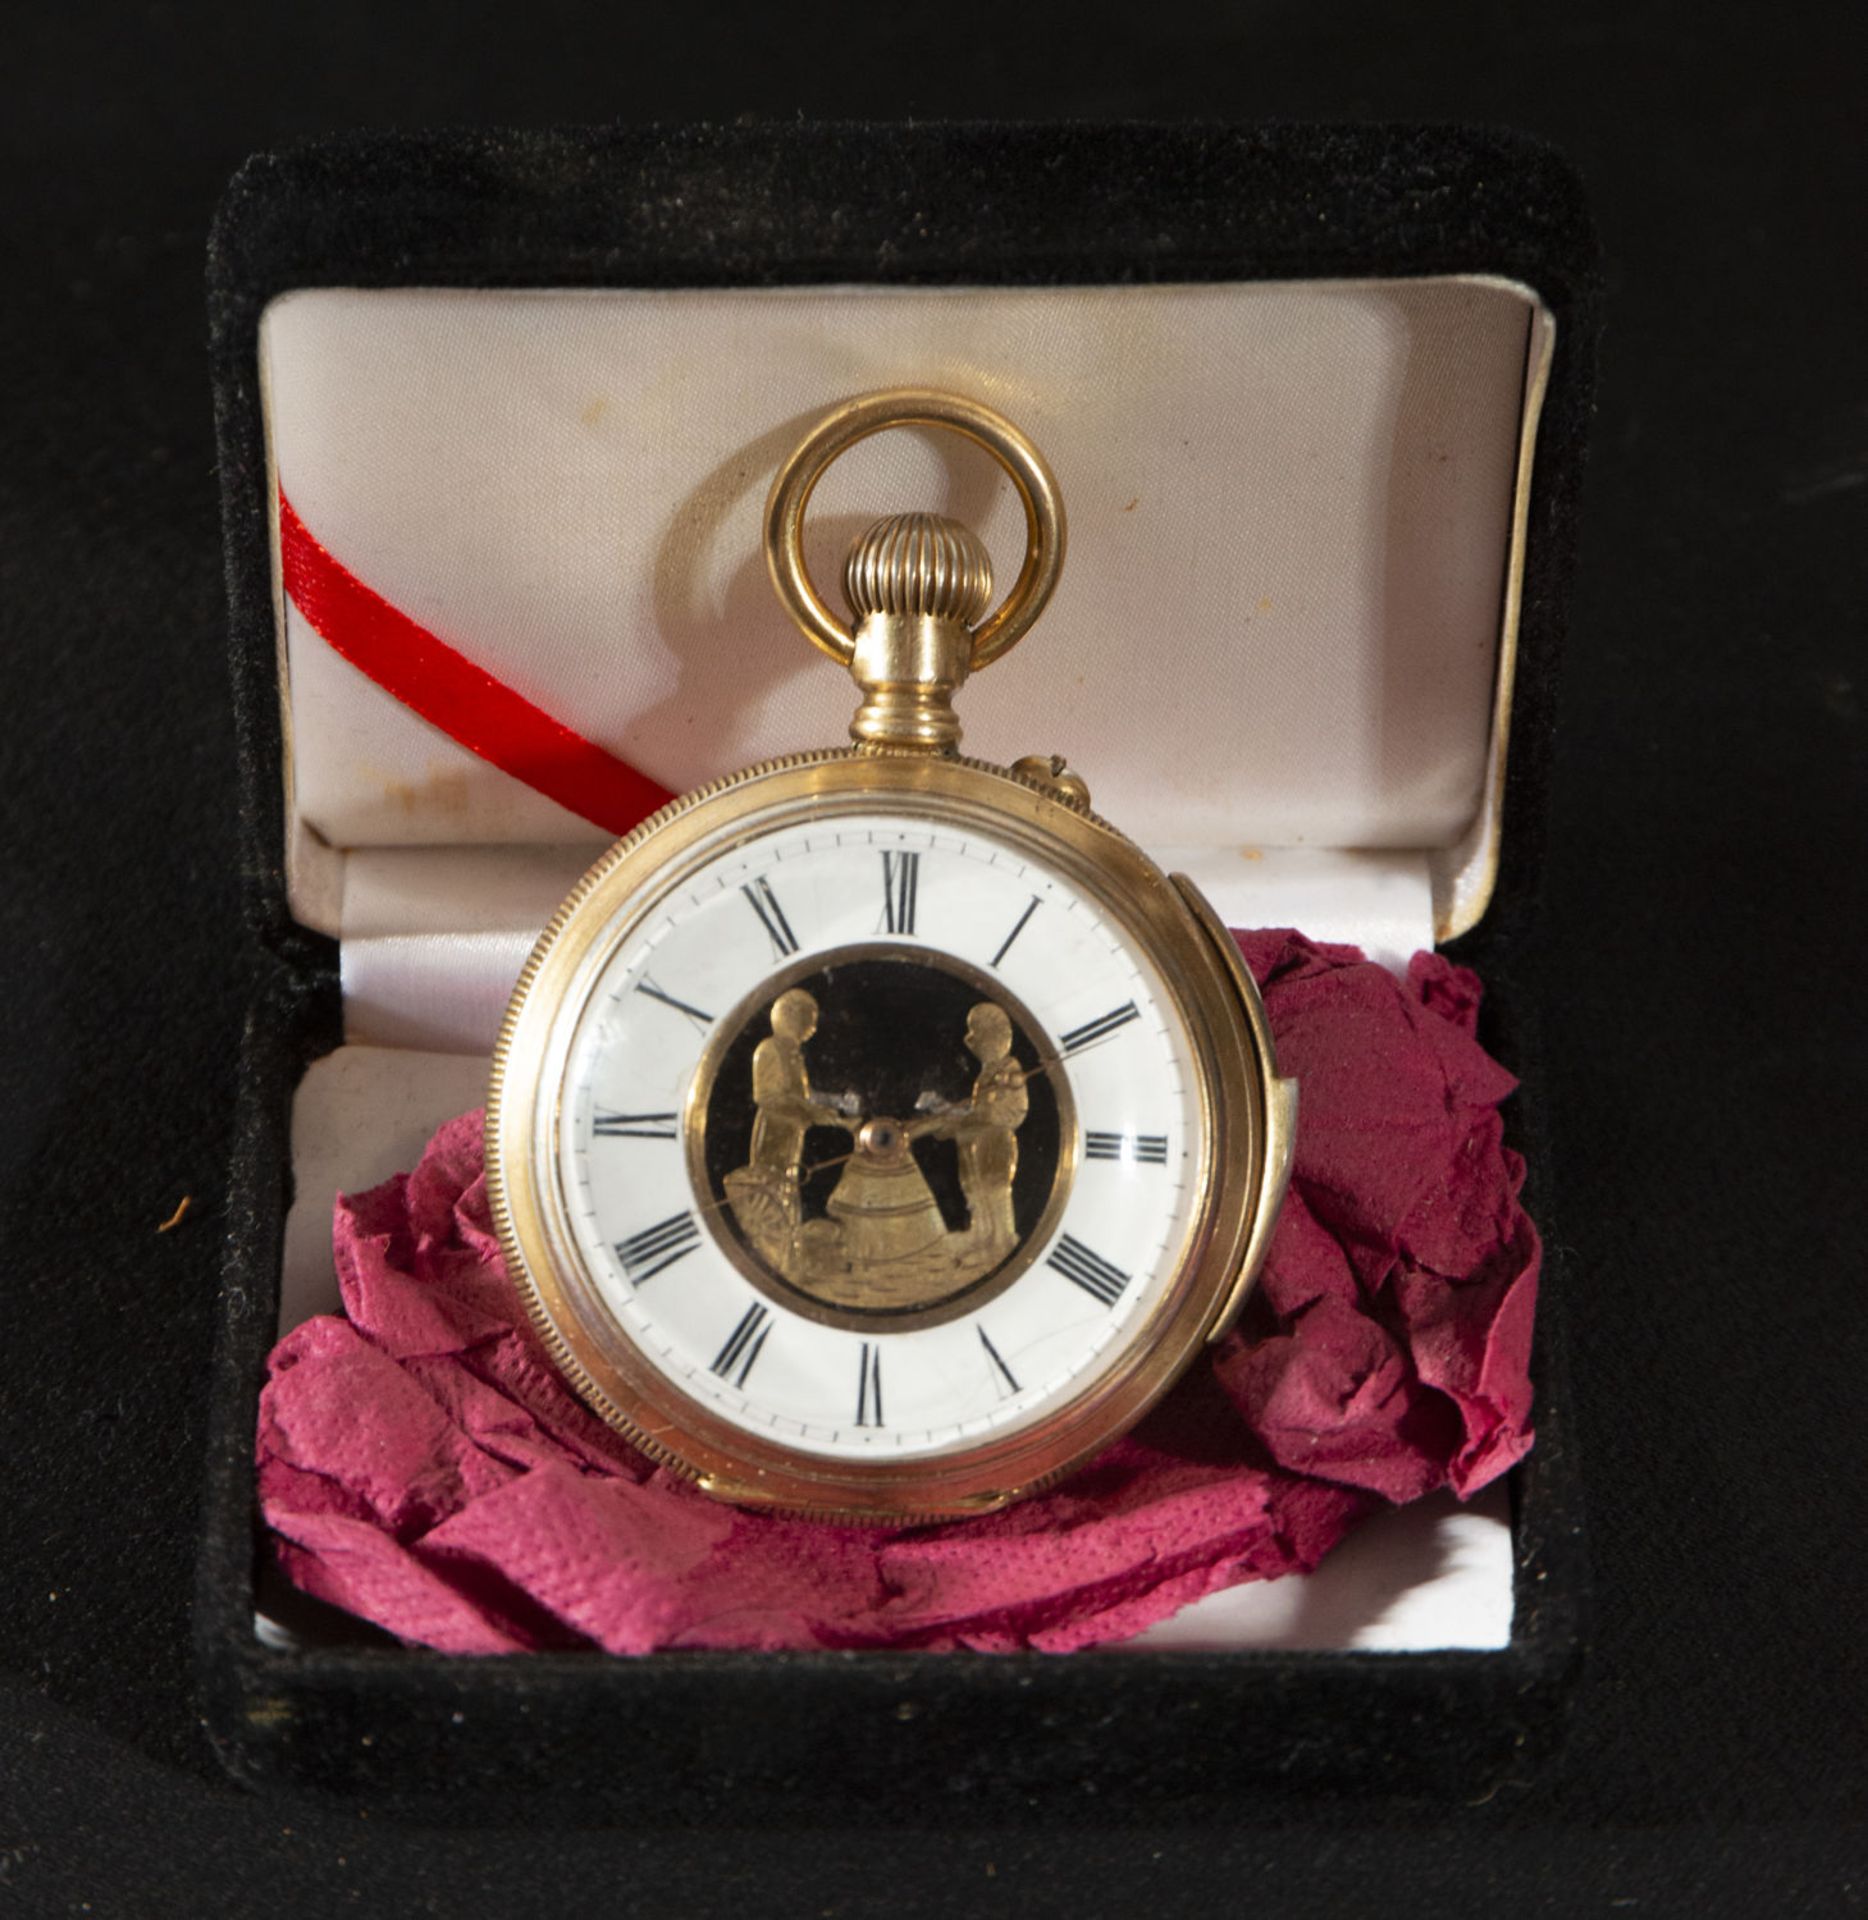 Rare Erotic pocket watch in 18k gold, 18th - 19th century